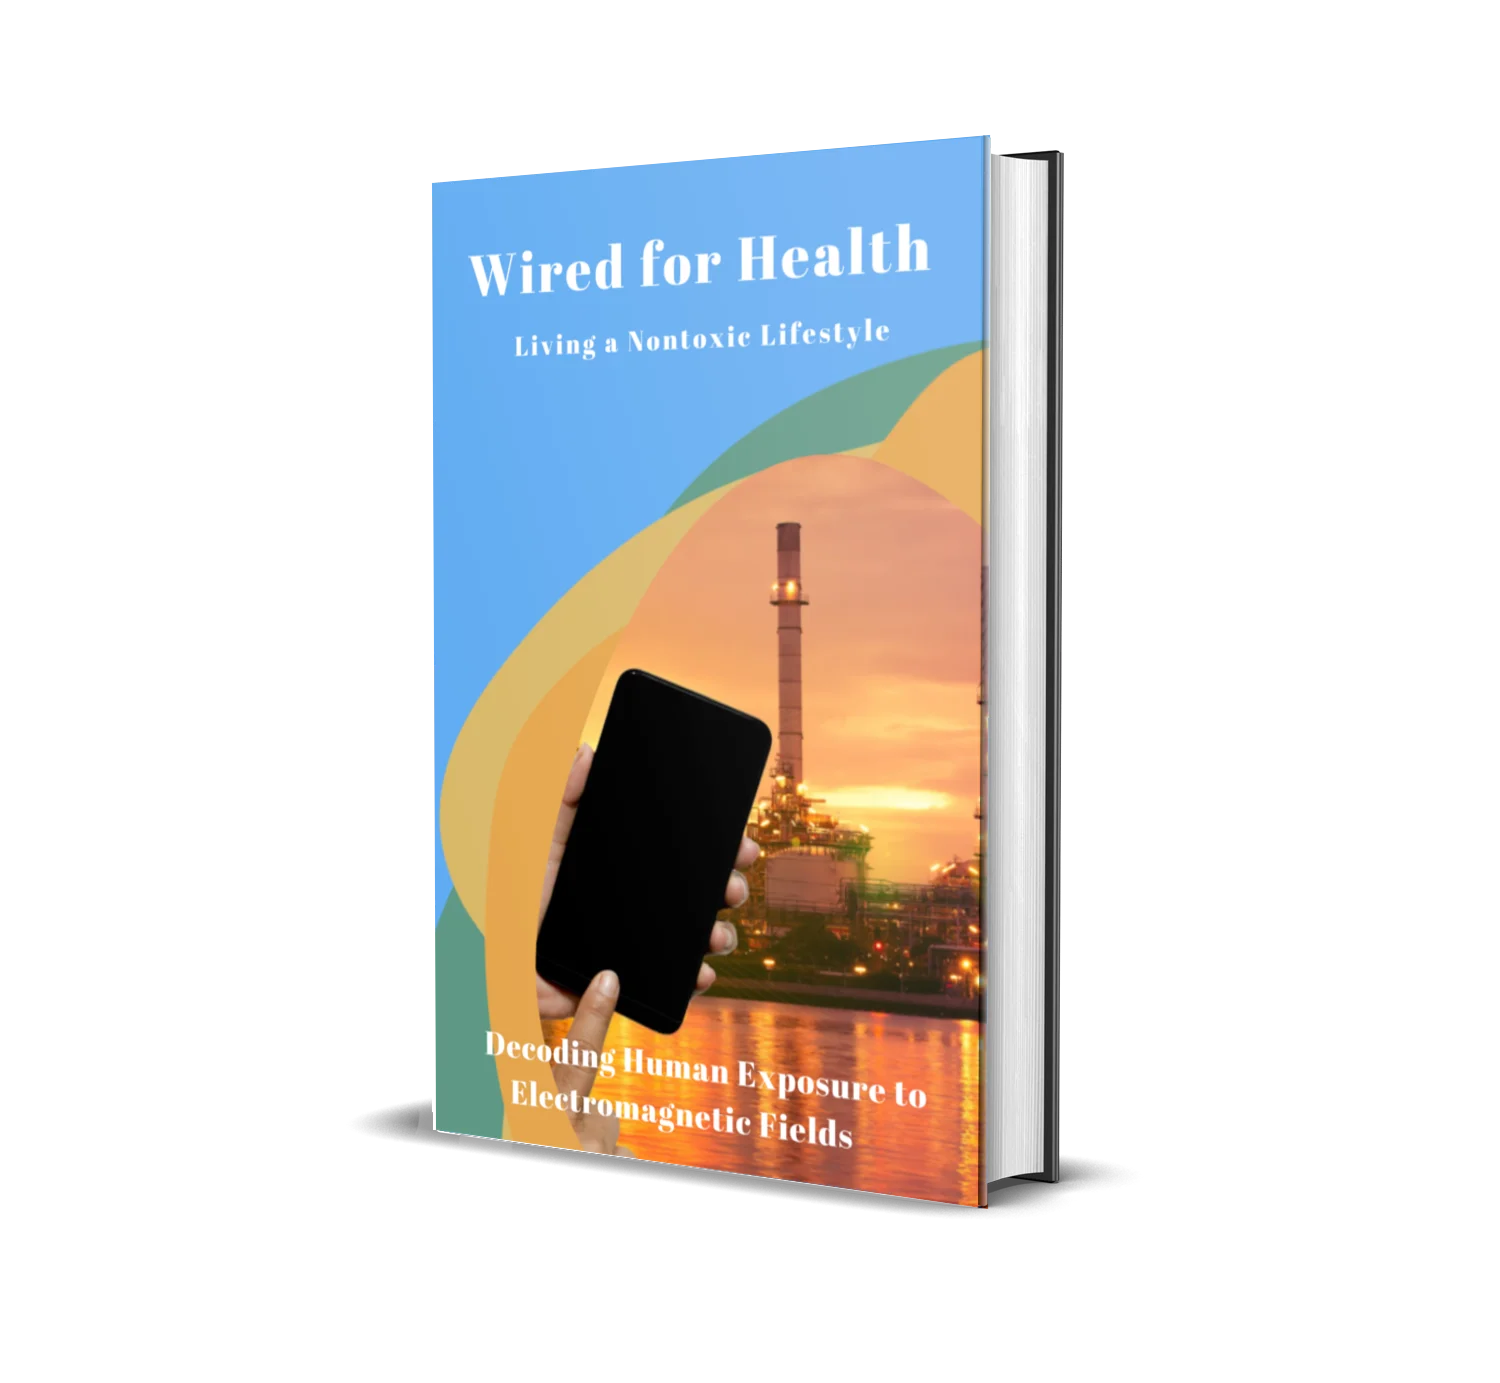 wired for health book cover.